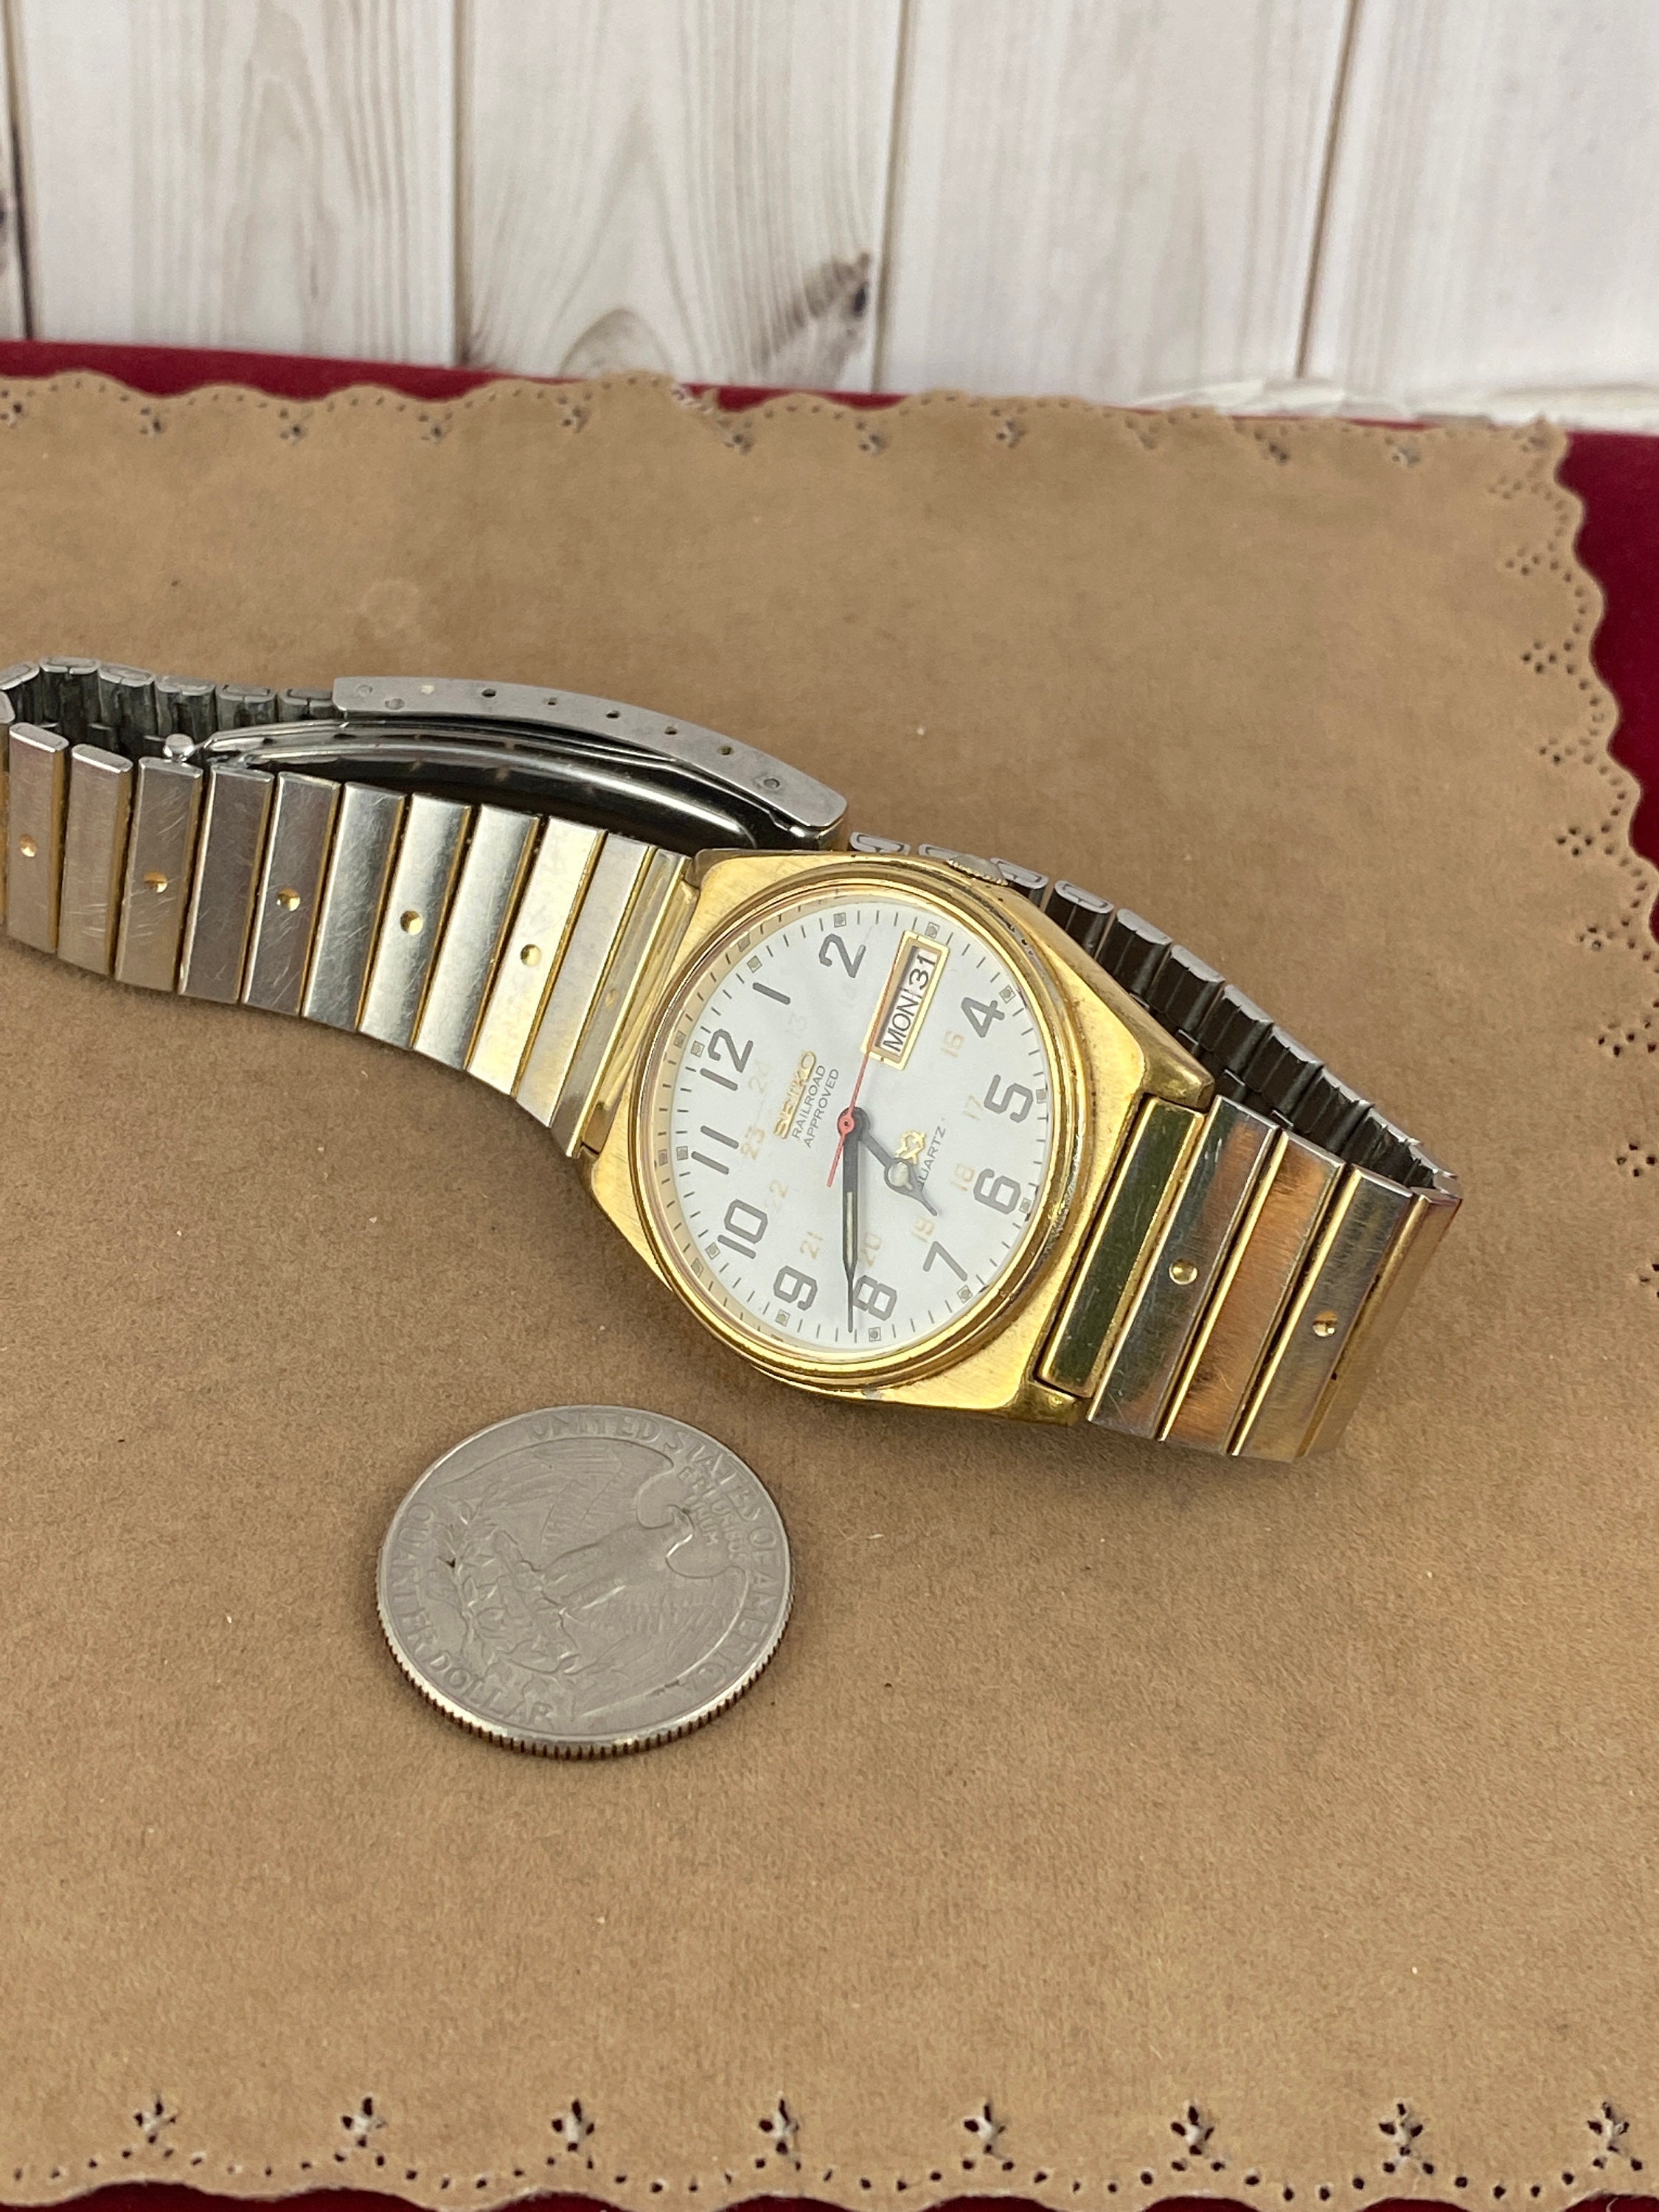 Vintage Seiko Railroad Approved Quartz Watch in Working and in - Etsy